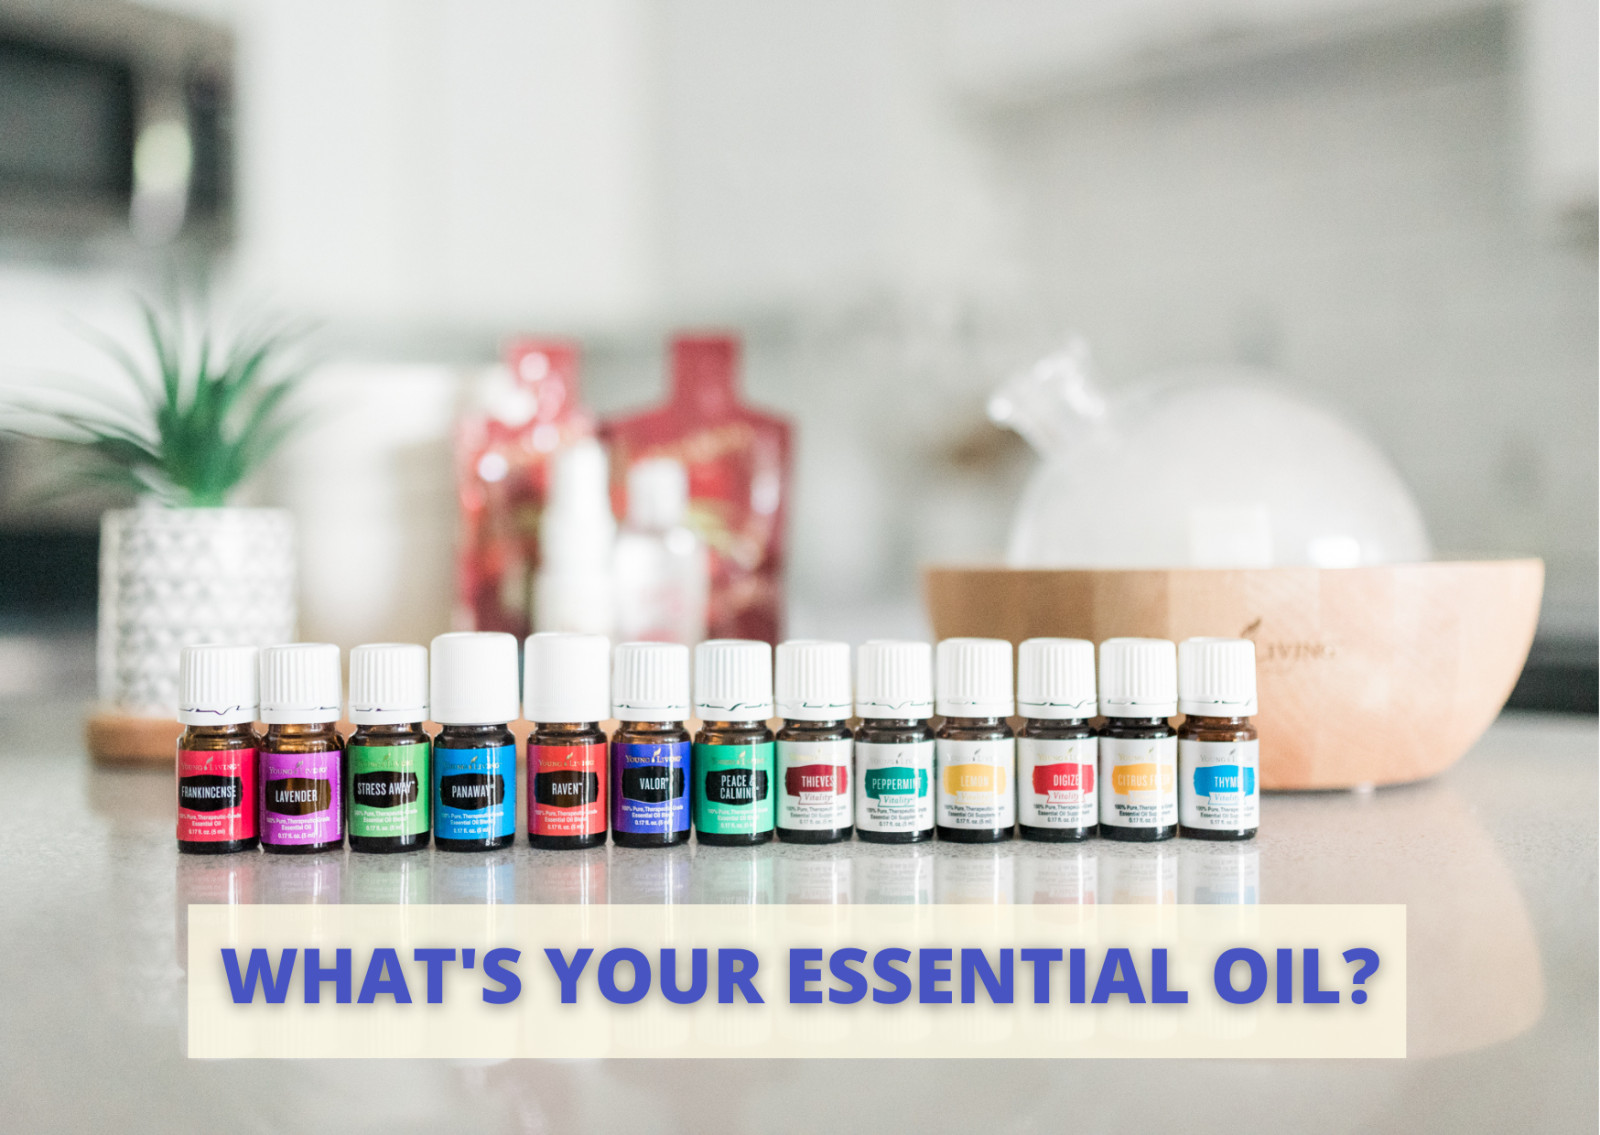 WHAT'S YOUR ESSENTIAL OIL?